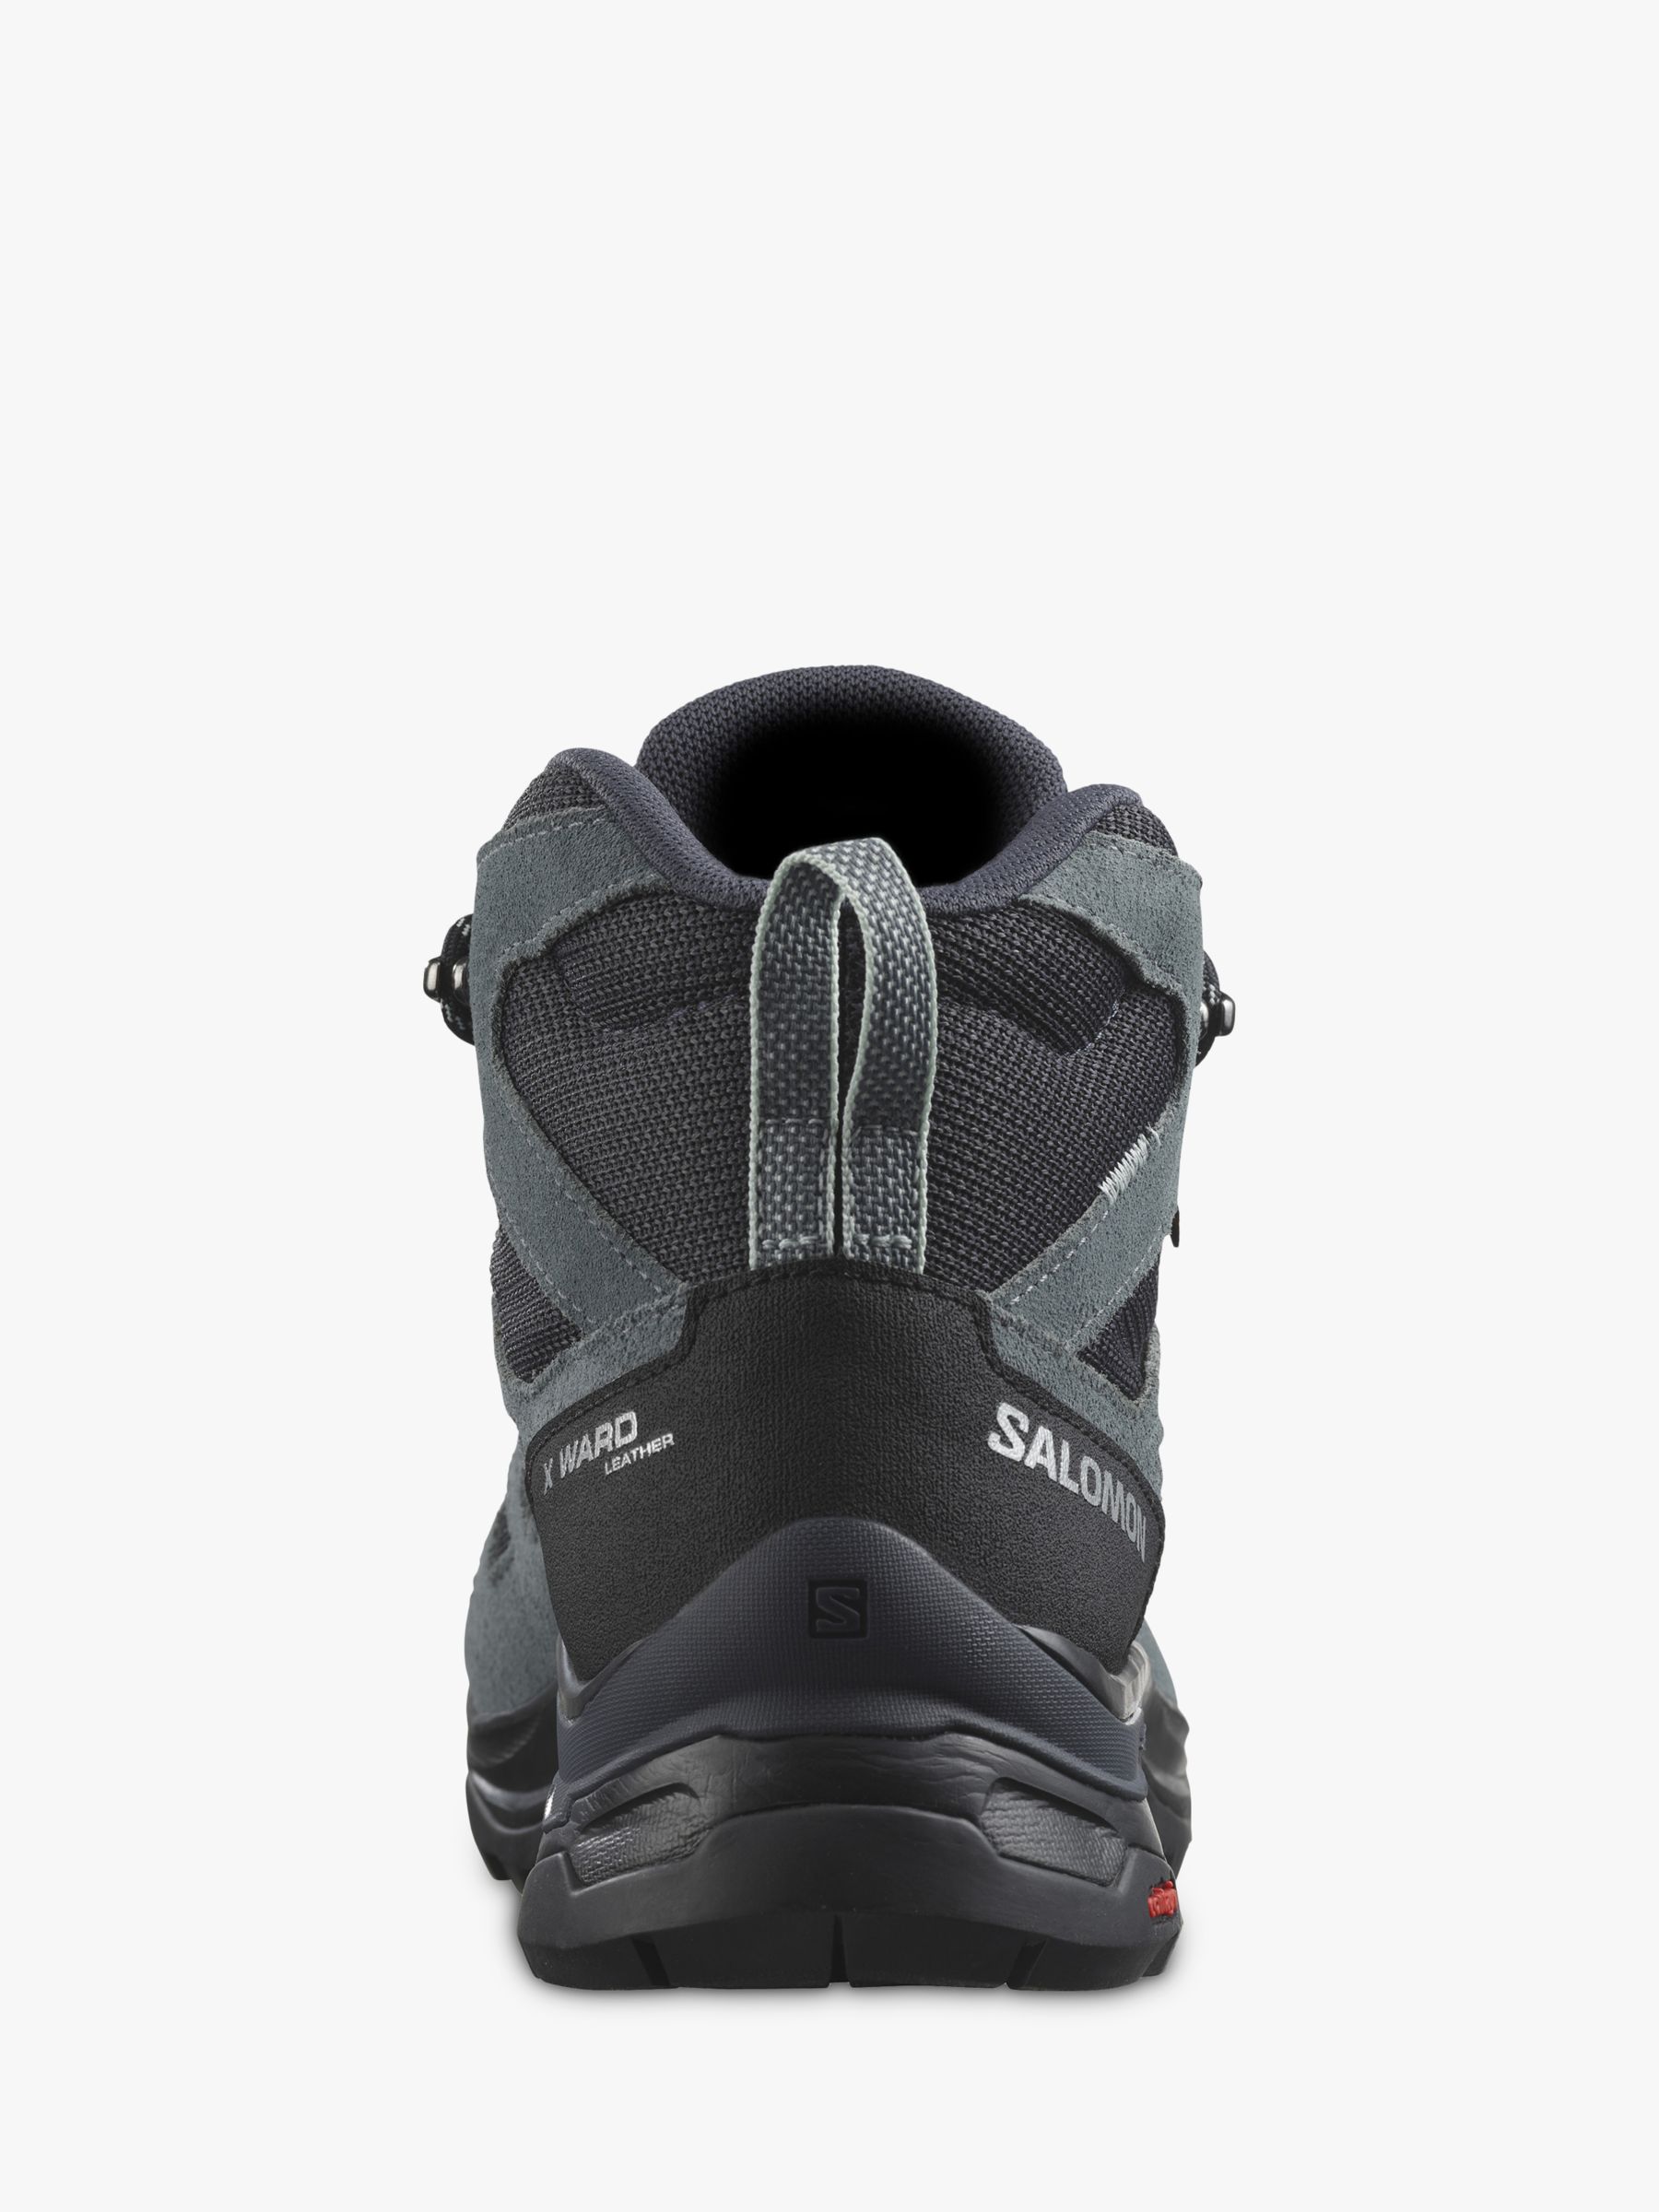 Buy Salomon X Ward Leather Gore-Tex Women's Trail Shoes, India Ink/Black Online at johnlewis.com